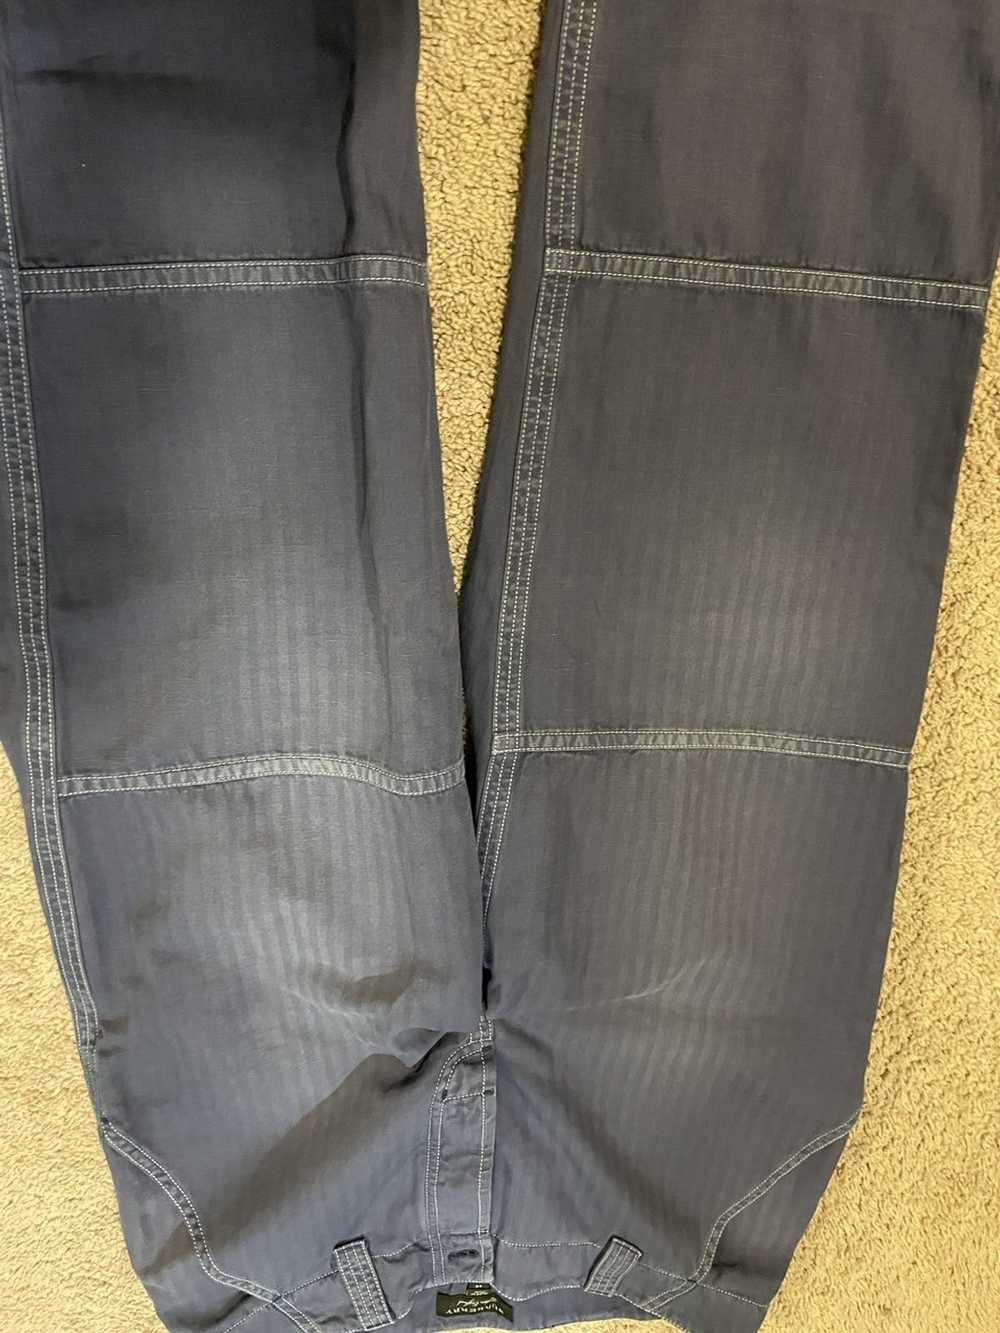 Burberry Thomas Burberry Casual Pants by Burberry - image 3